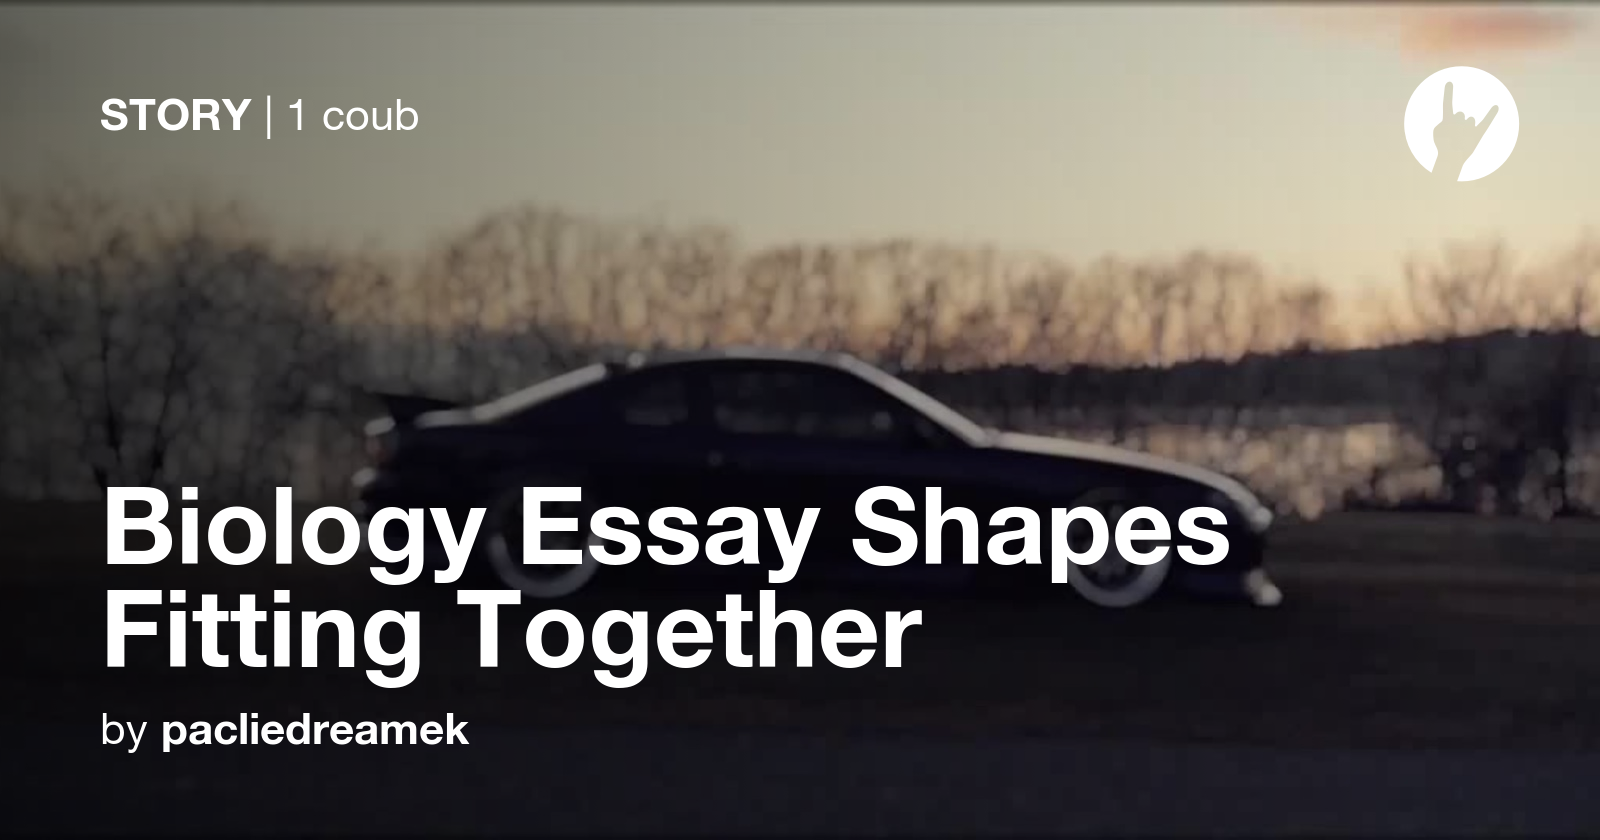 biology essay the importance of shapes fitting together